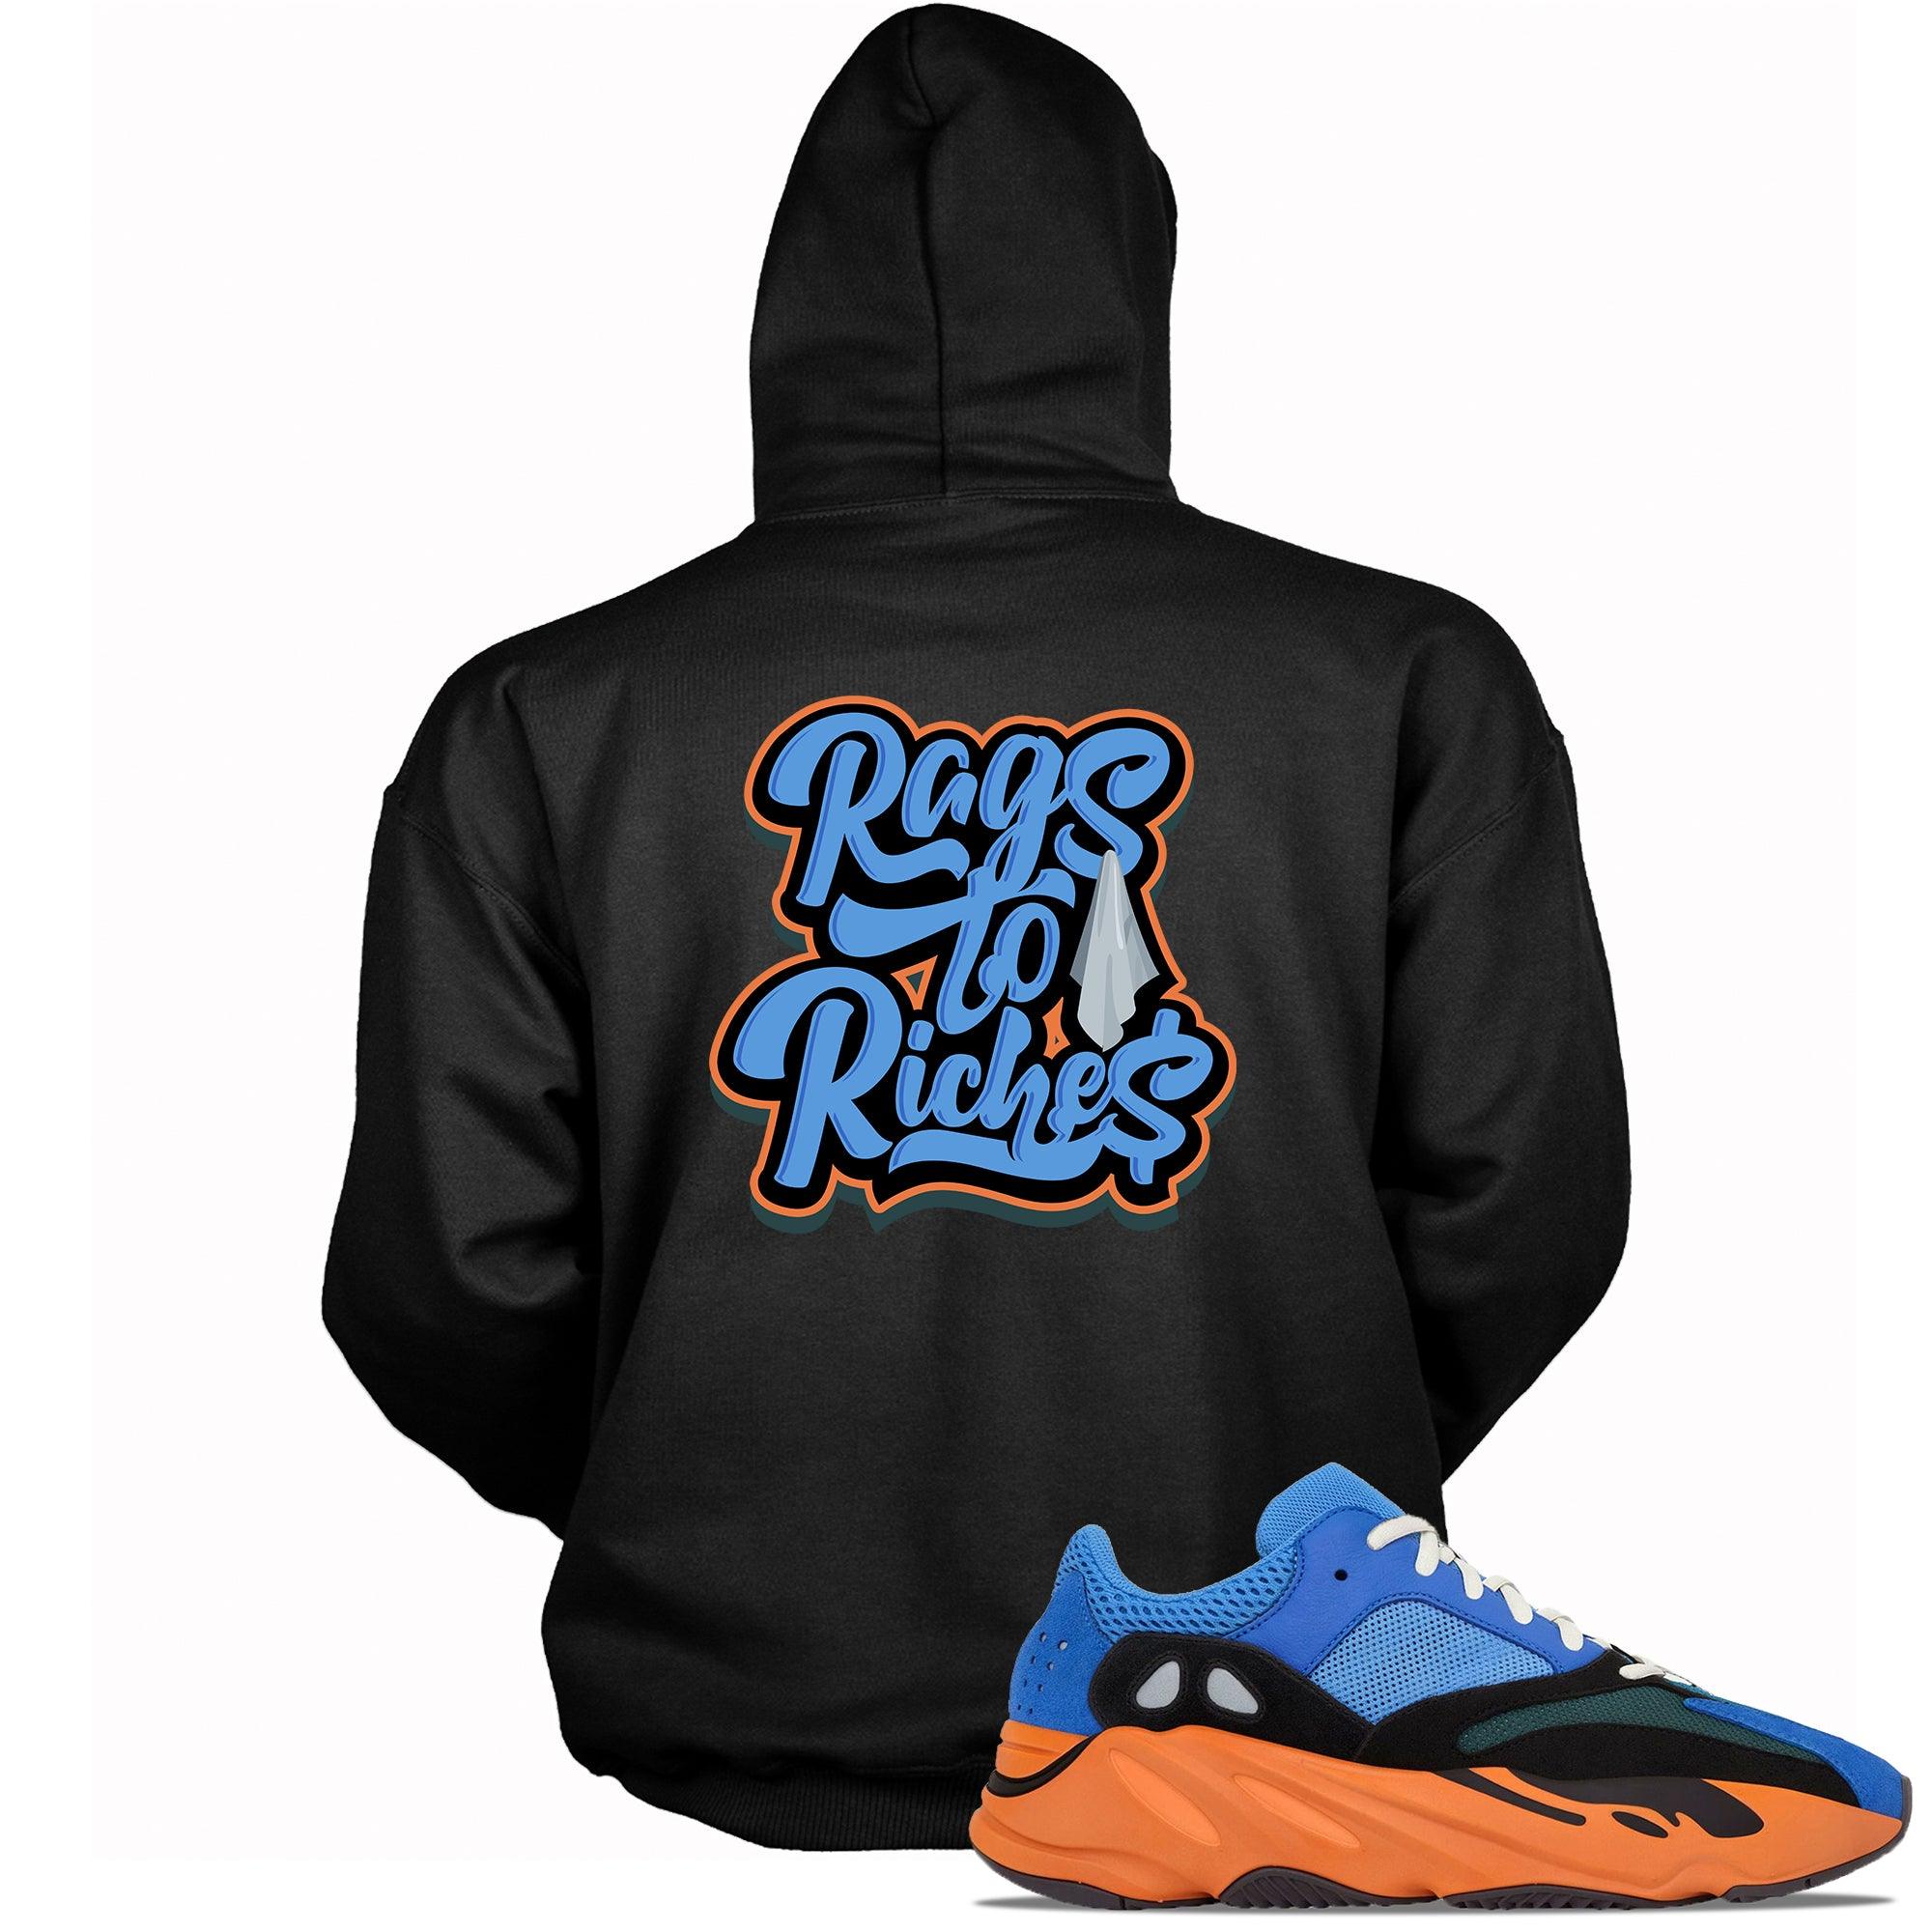 Black Rags To Riches Hoodie Yeezy Boost 700s Bright Blue photo